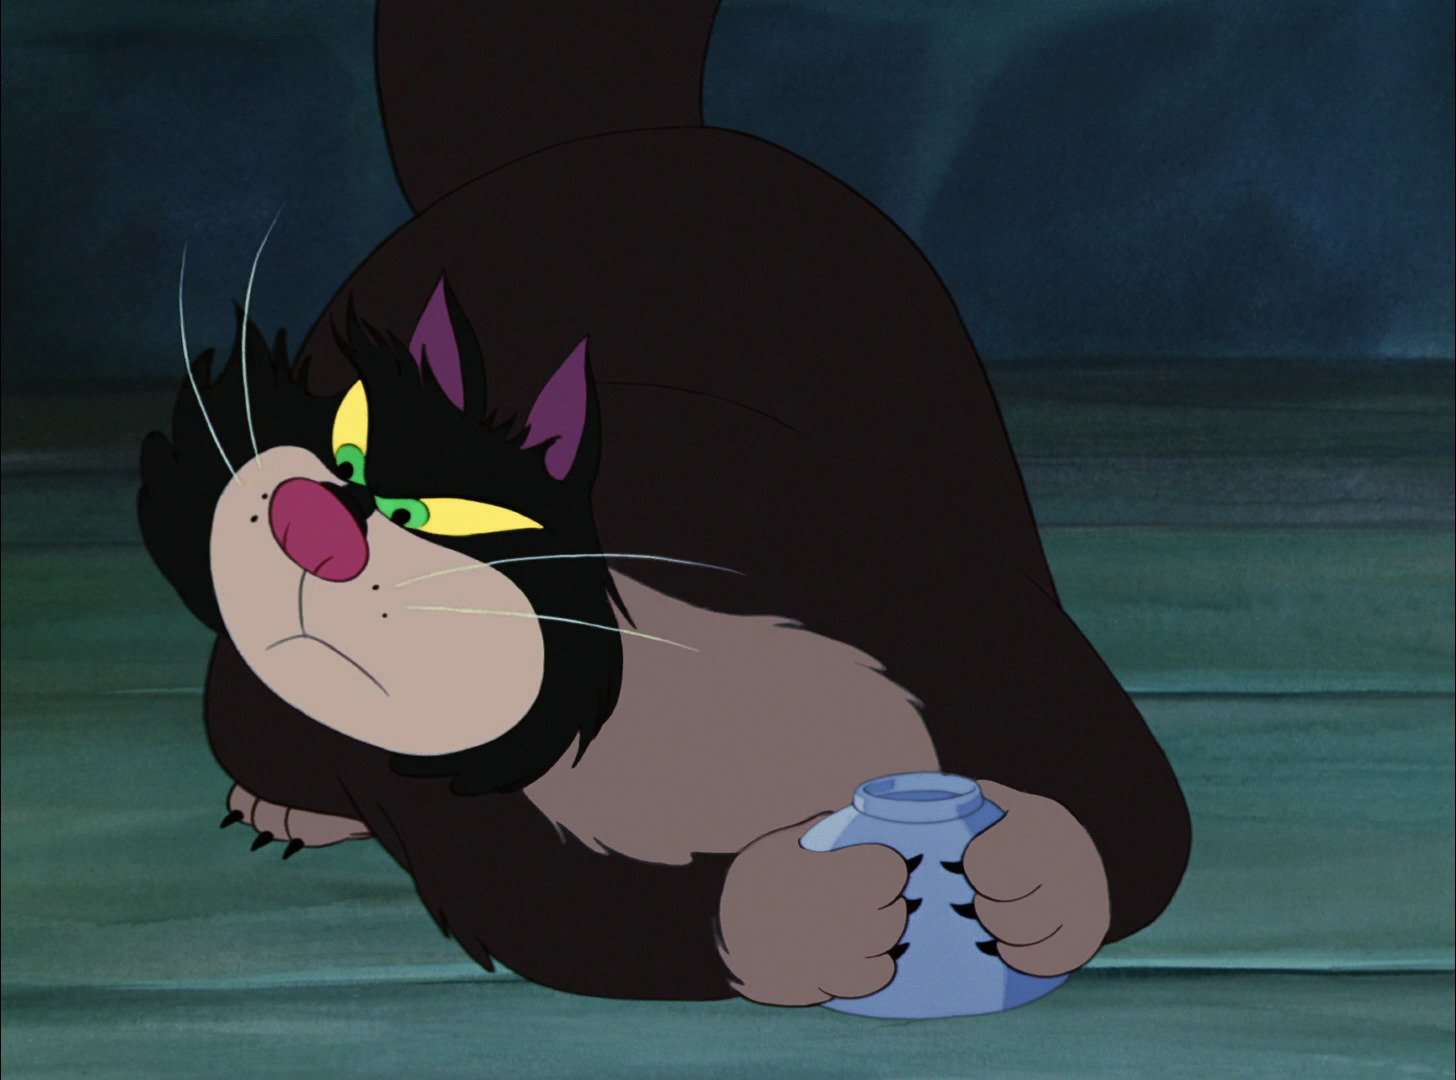 What was the name of the cat in Walt...